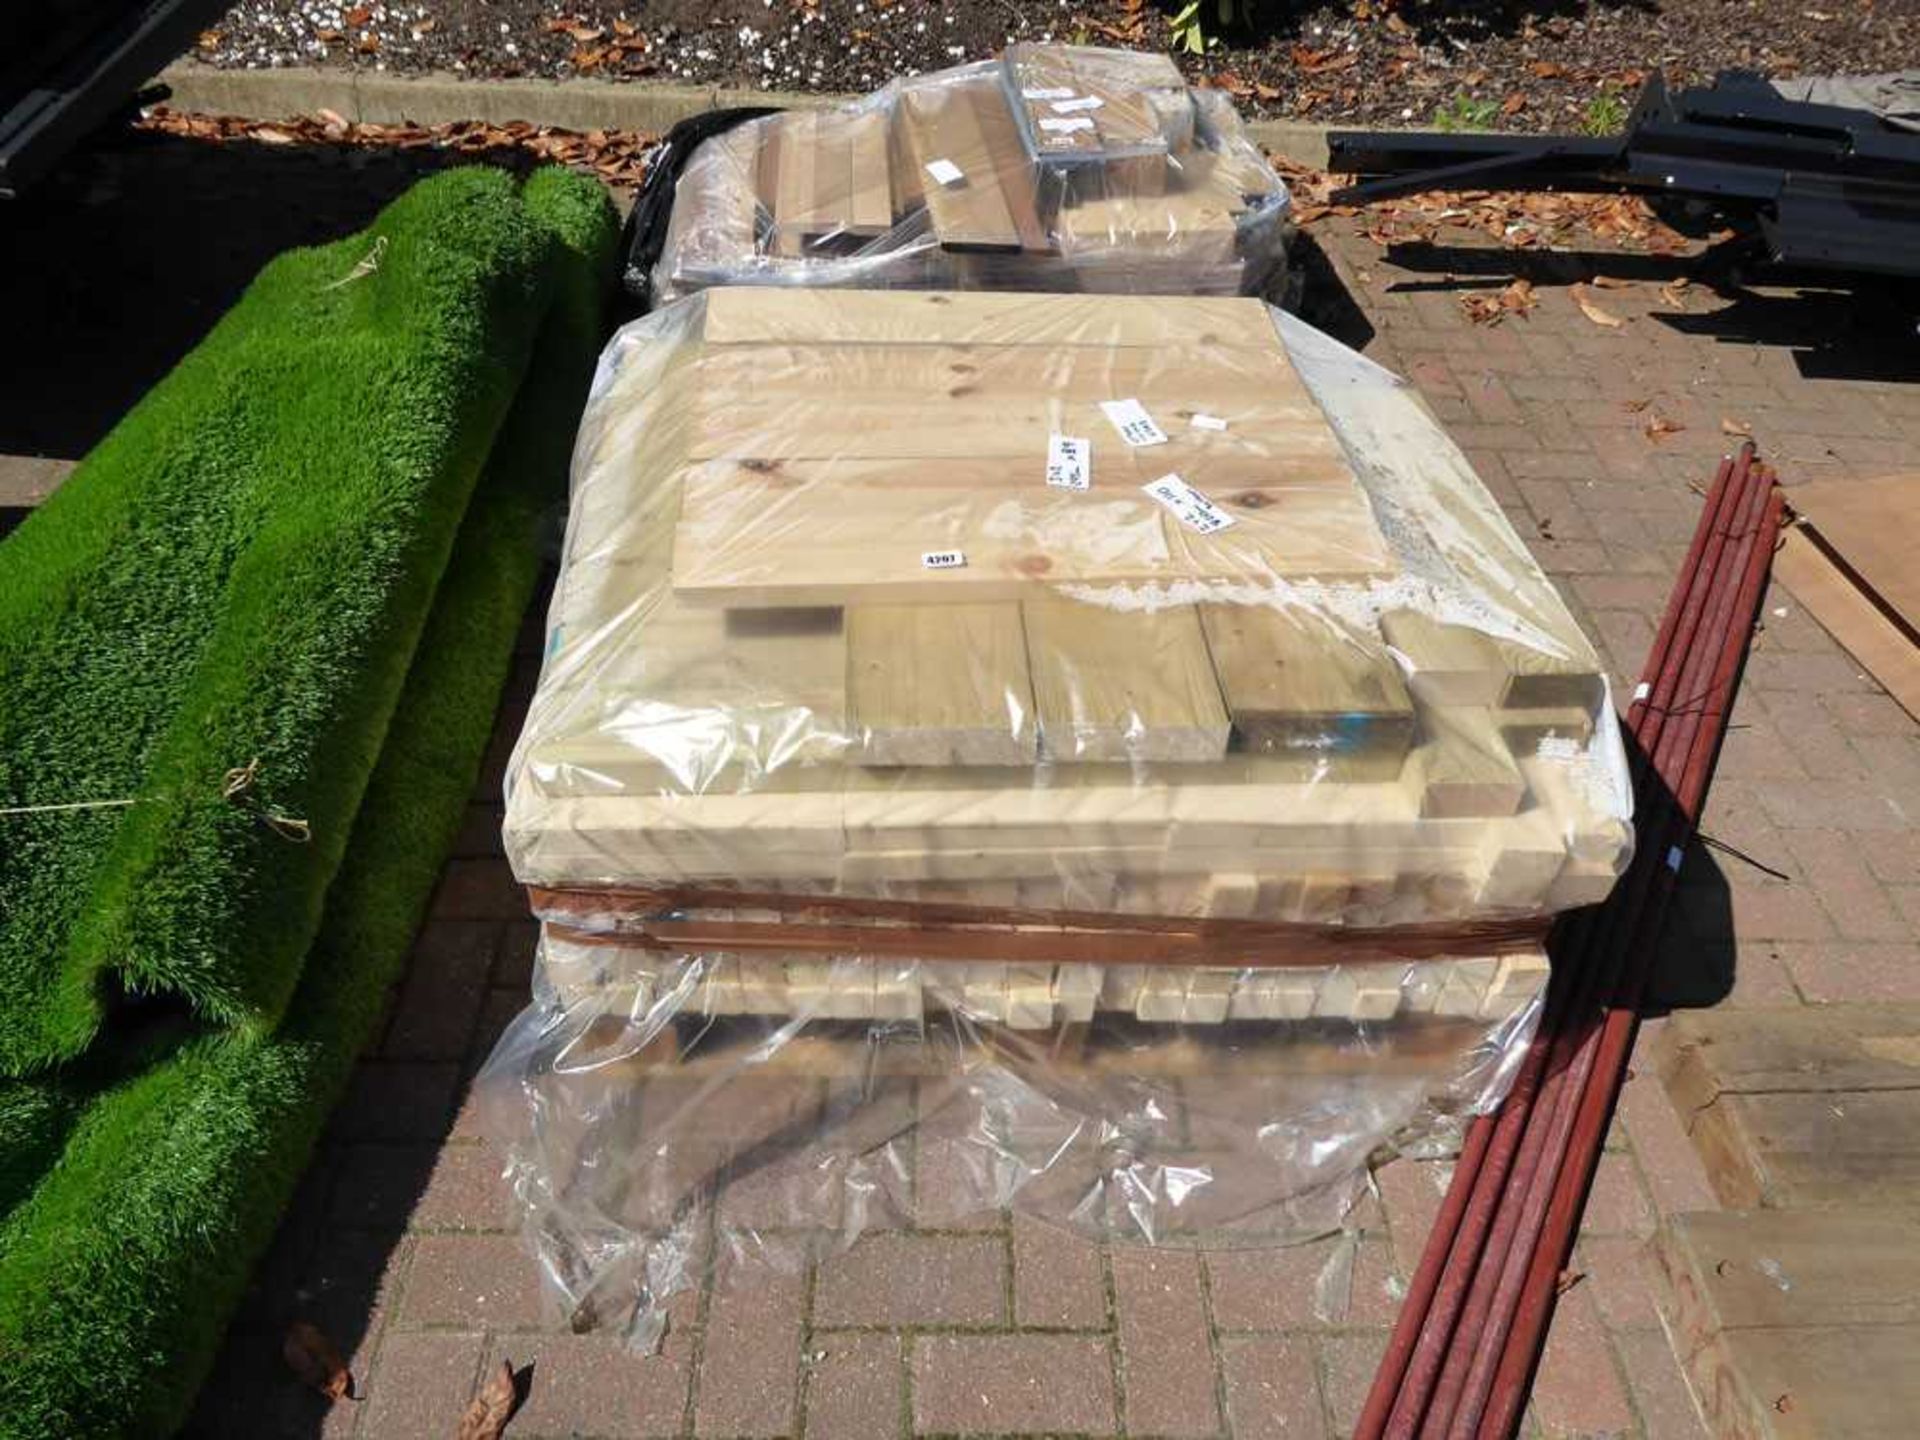 Pallet containing wooden offcuts